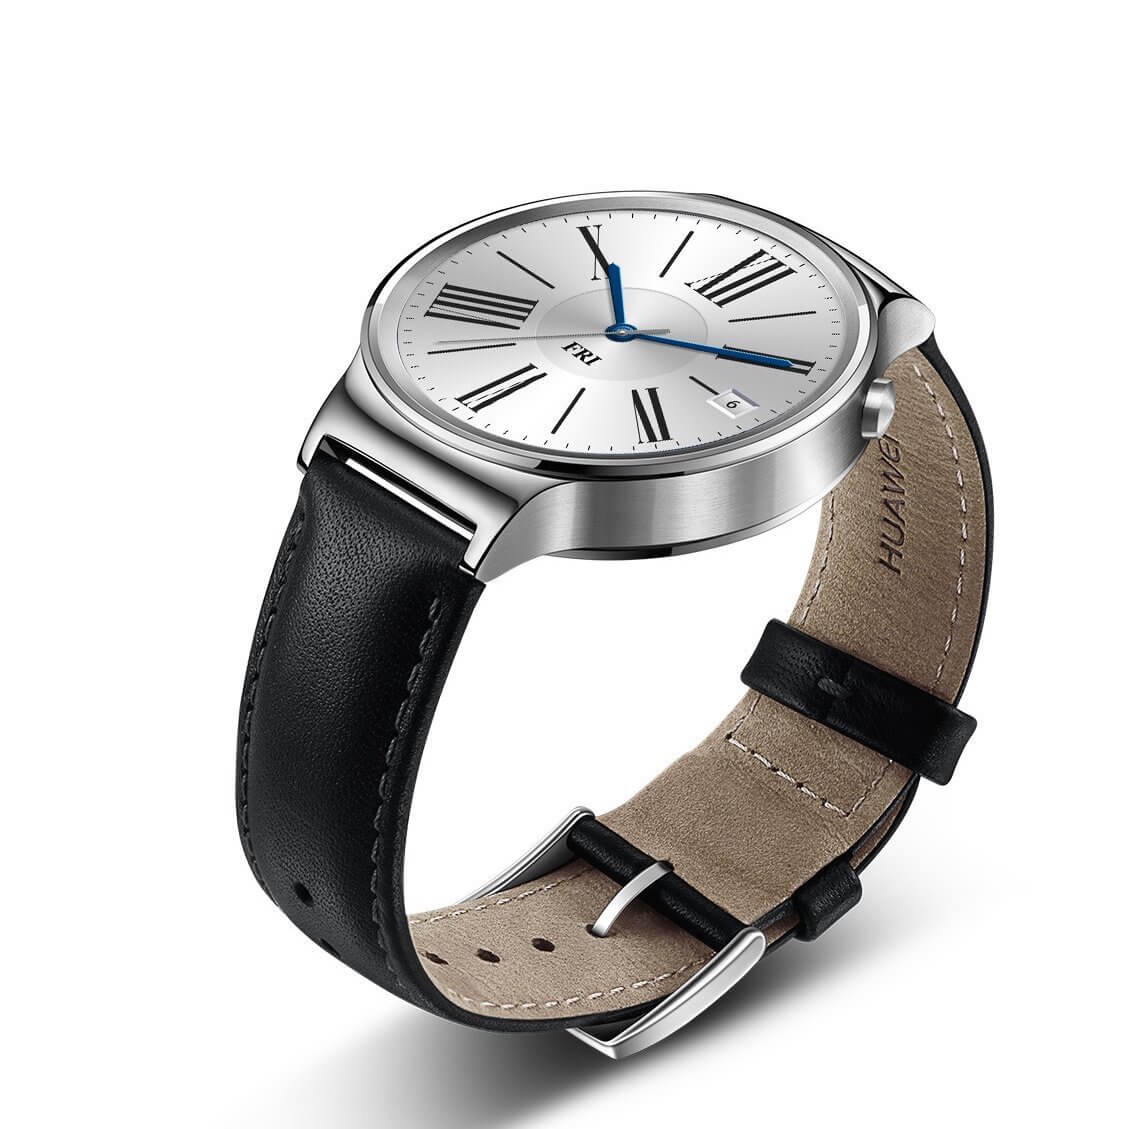 Huawei Watch Stainless Steel